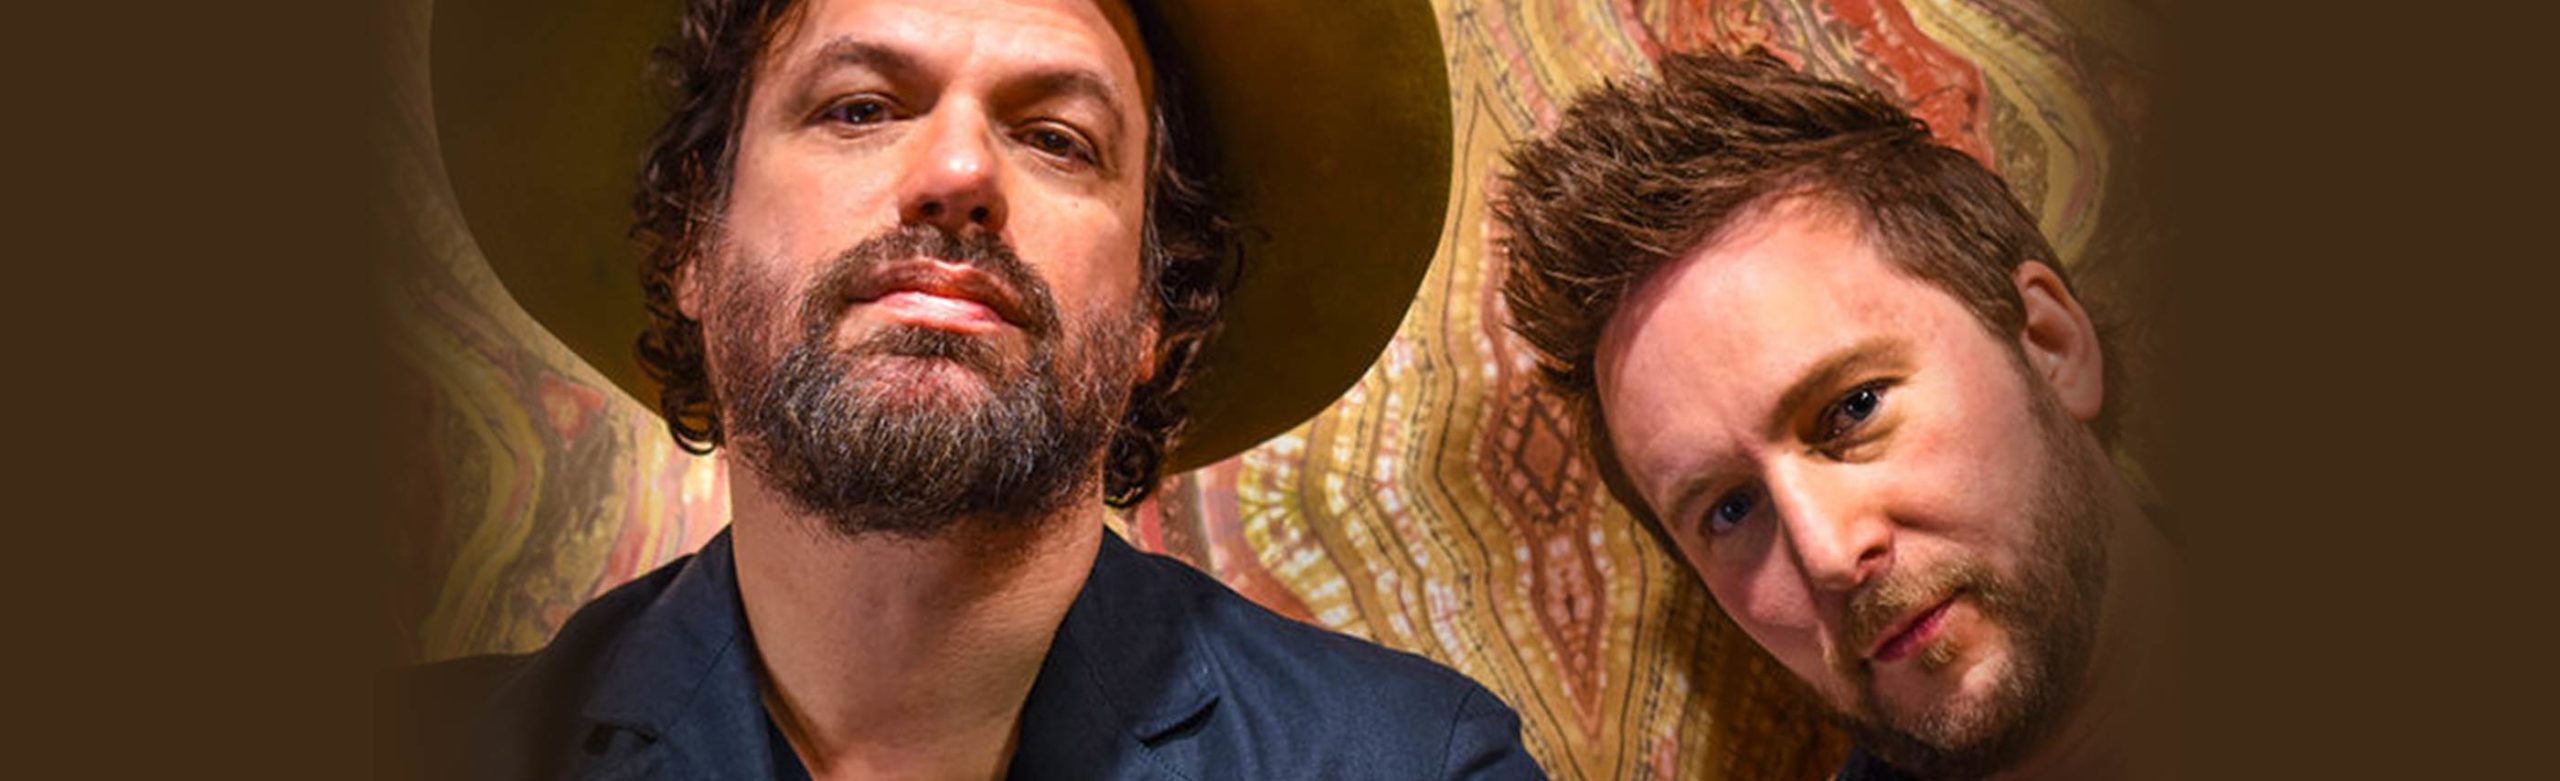 Rusted Root Duo: Singer-Songwriter Michael Glabicki and Dirk Miller to Headline Top Hat Image